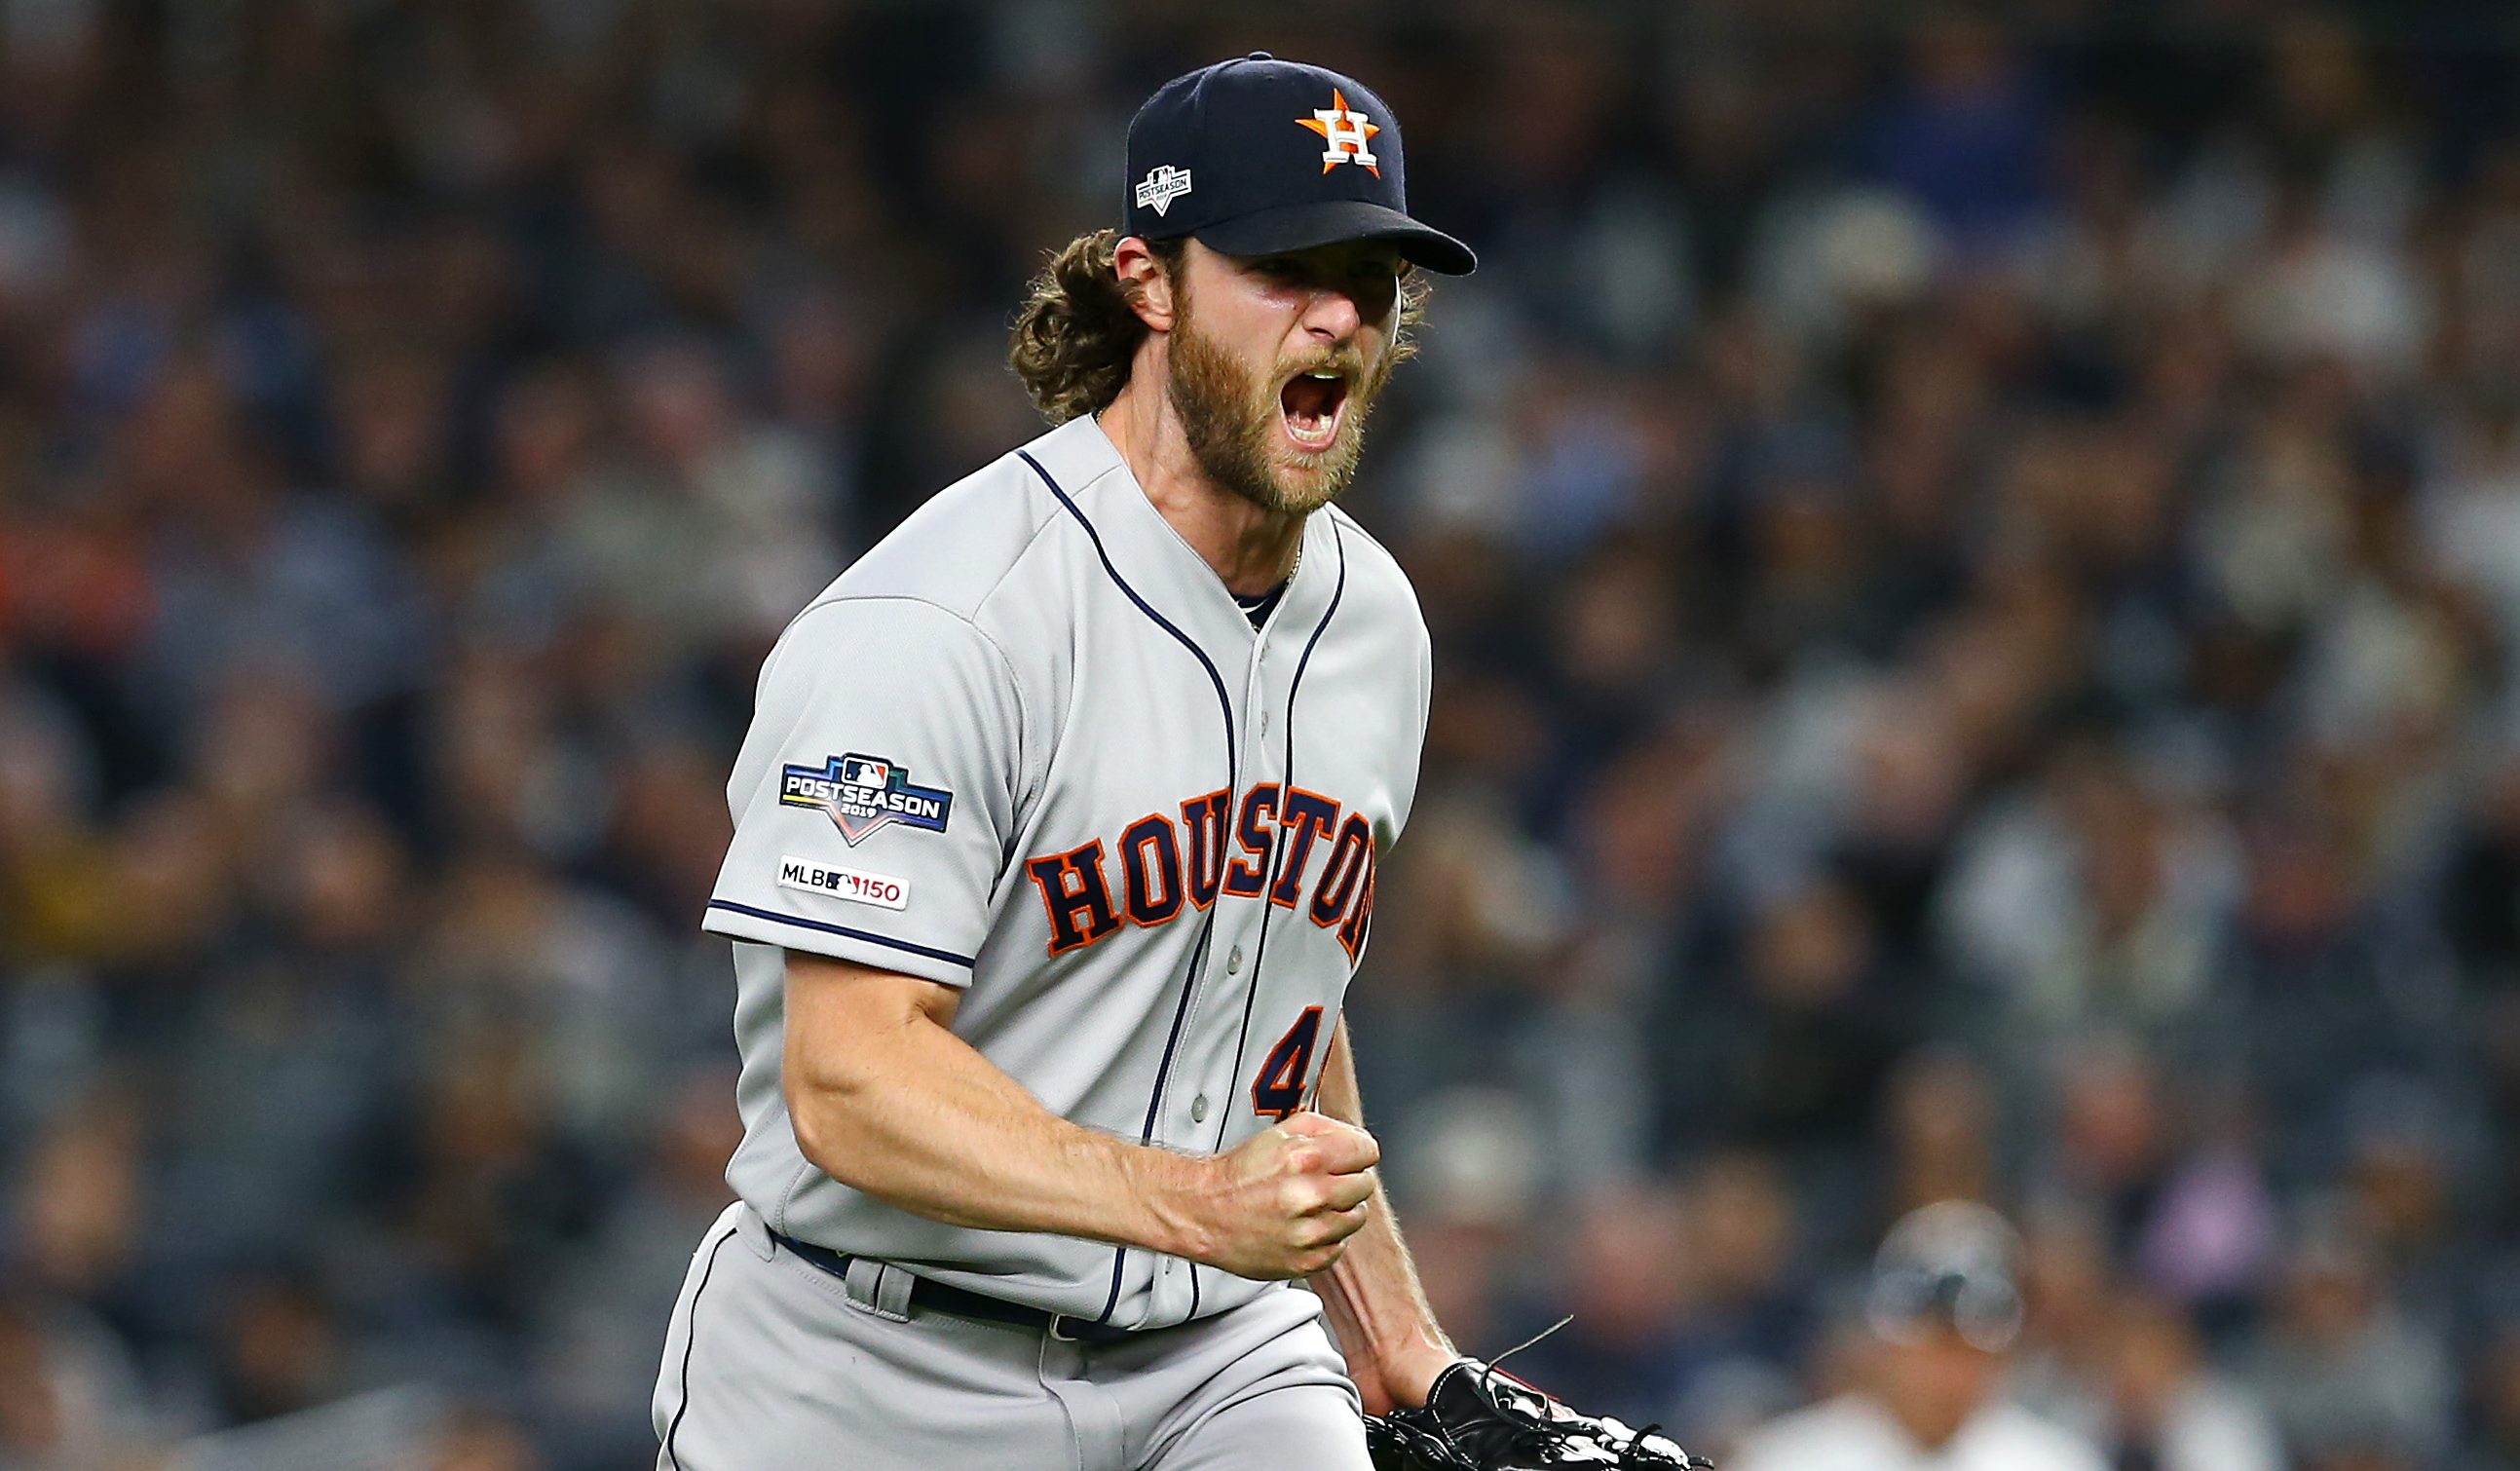 Yankees: Gerrit Cole shaved his beard and looks completely different